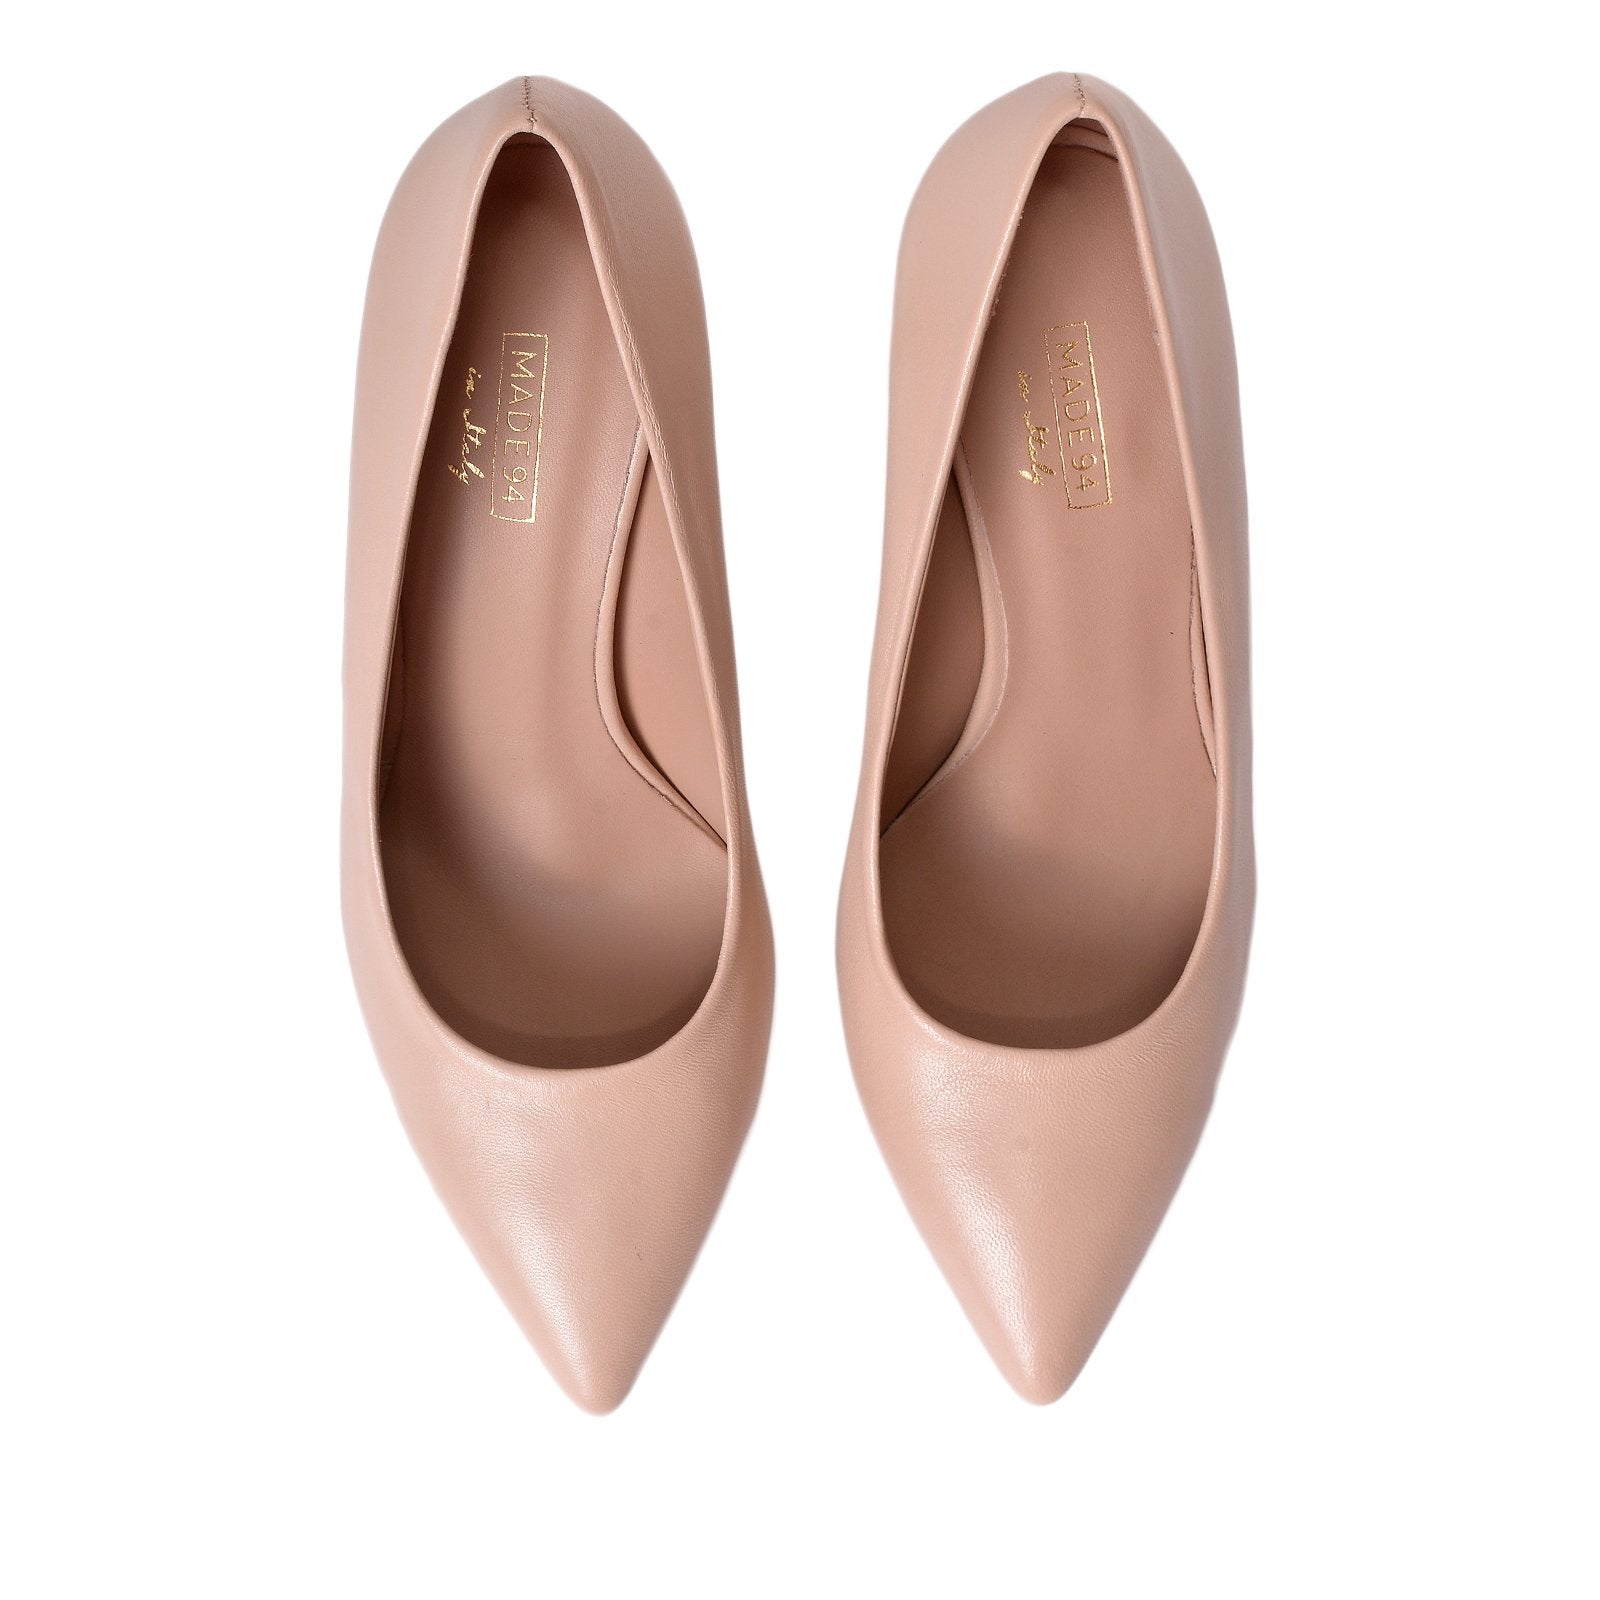 Rosa Nude Leather Pumps Heels 790-004-1 - 3